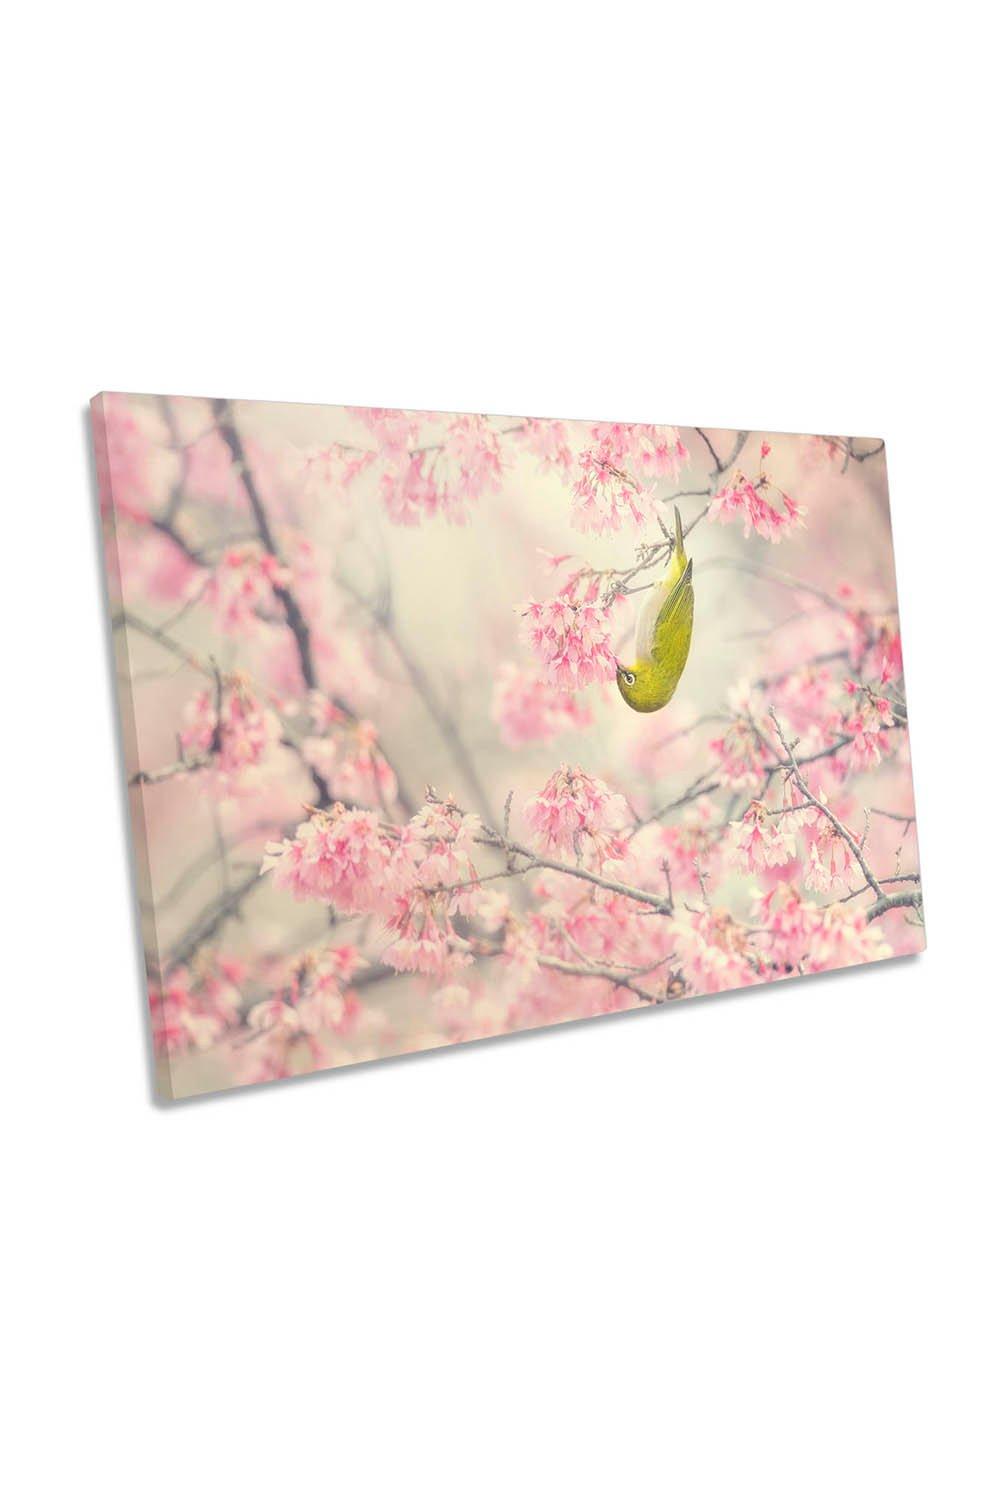 Cherry Blossom Floral Bird Pink Canvas Wall Art Picture Print